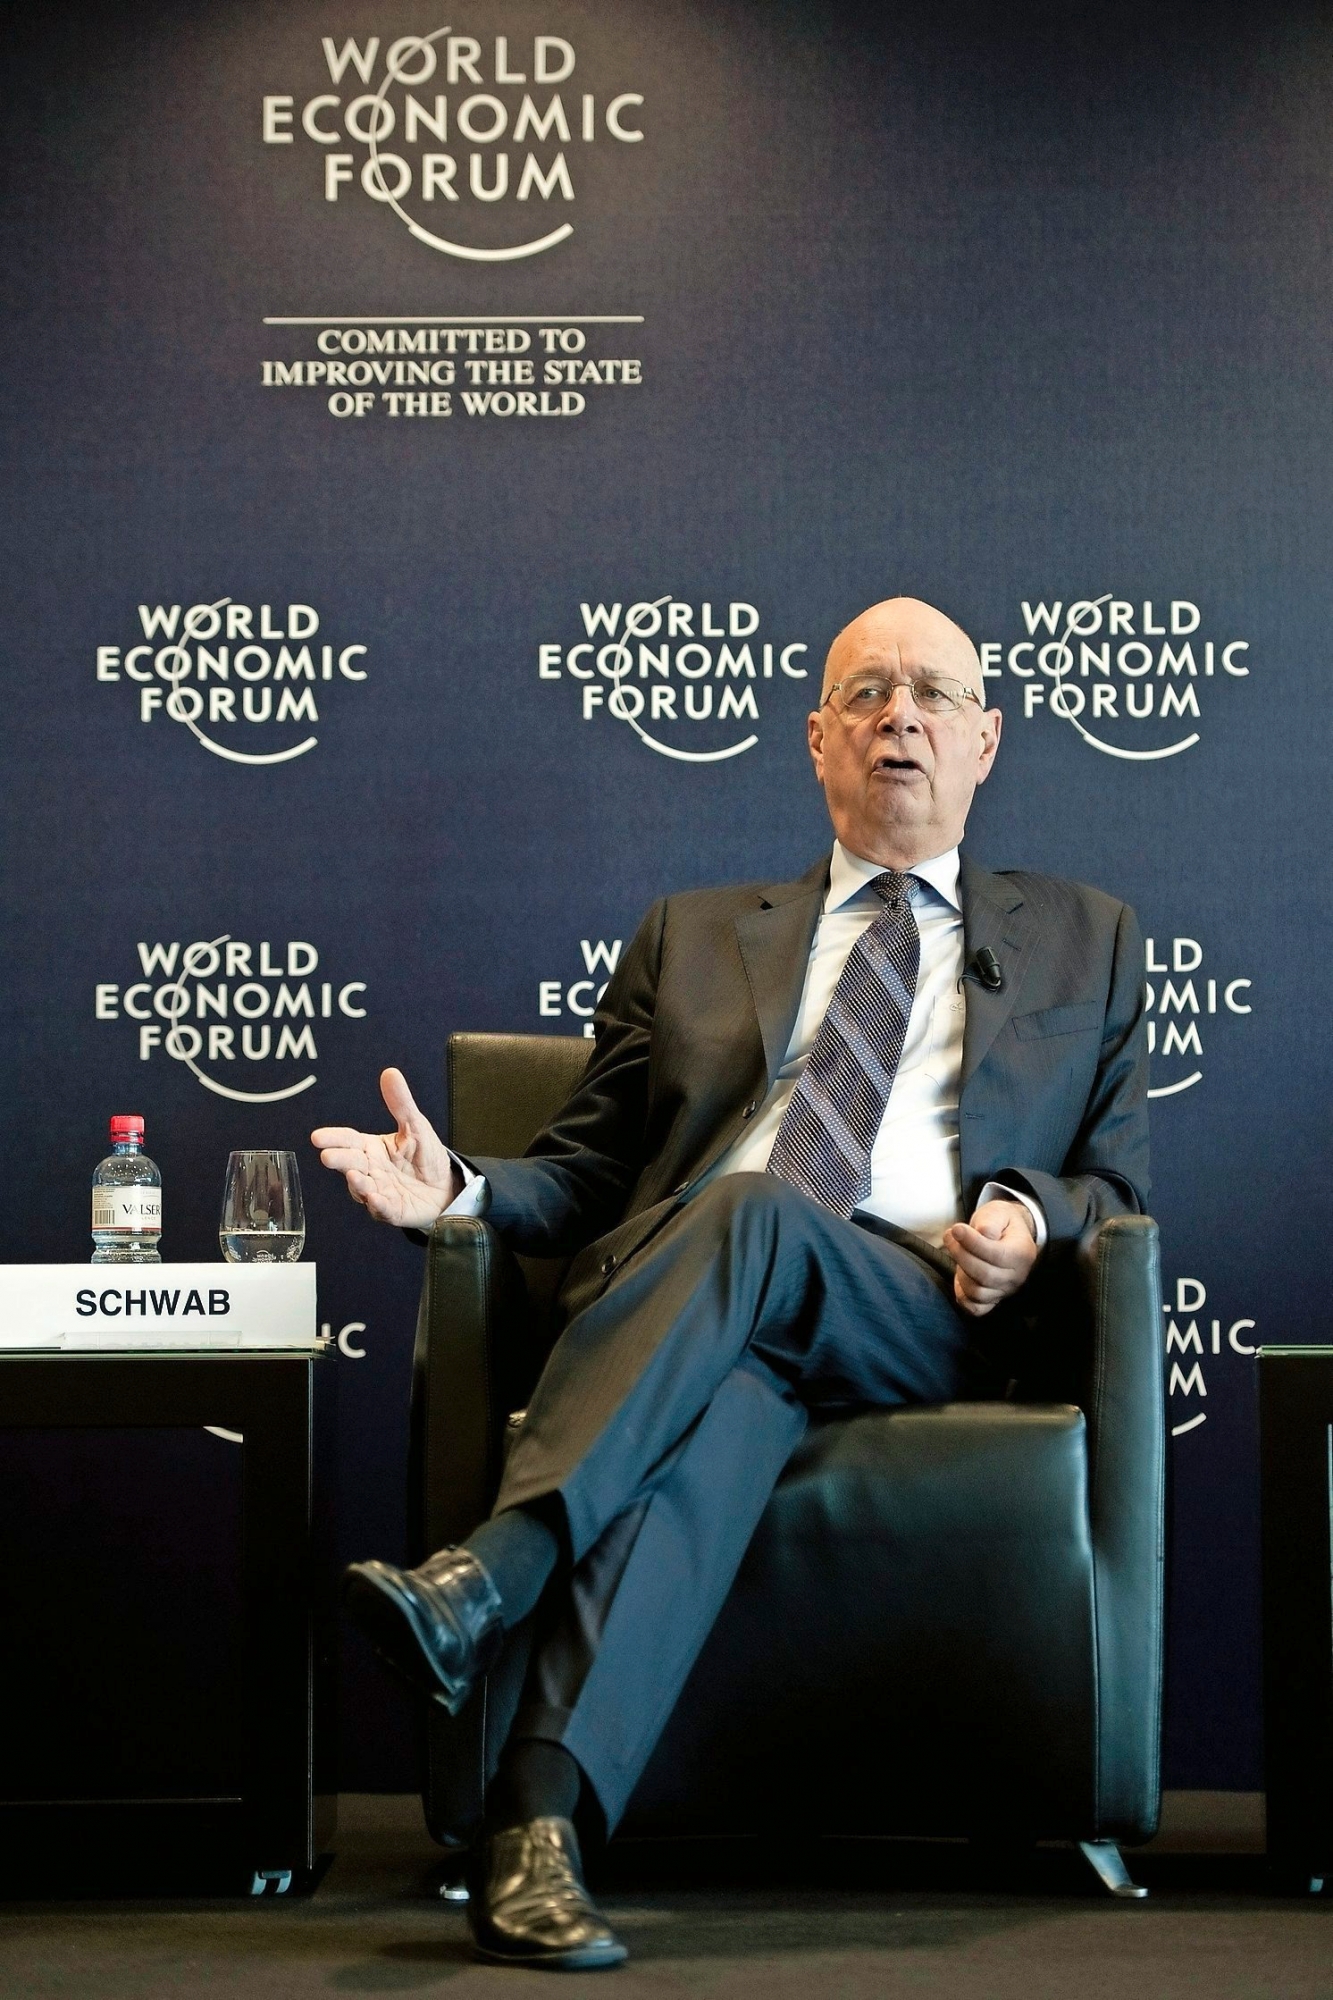 Swiss Klaus Schwab, founder and president of the World Economic Forum WEF, gestures during a press conference, in Cologny near Geneva, Switzerland, Wednesday, January 19, 2011, where he talked about the upcoming WEF taking place in Davos, Switzerland, from January 26 to 30. (KEYSTONE/Jean-Christophe Bott) SCHWEIZ WEF 2011